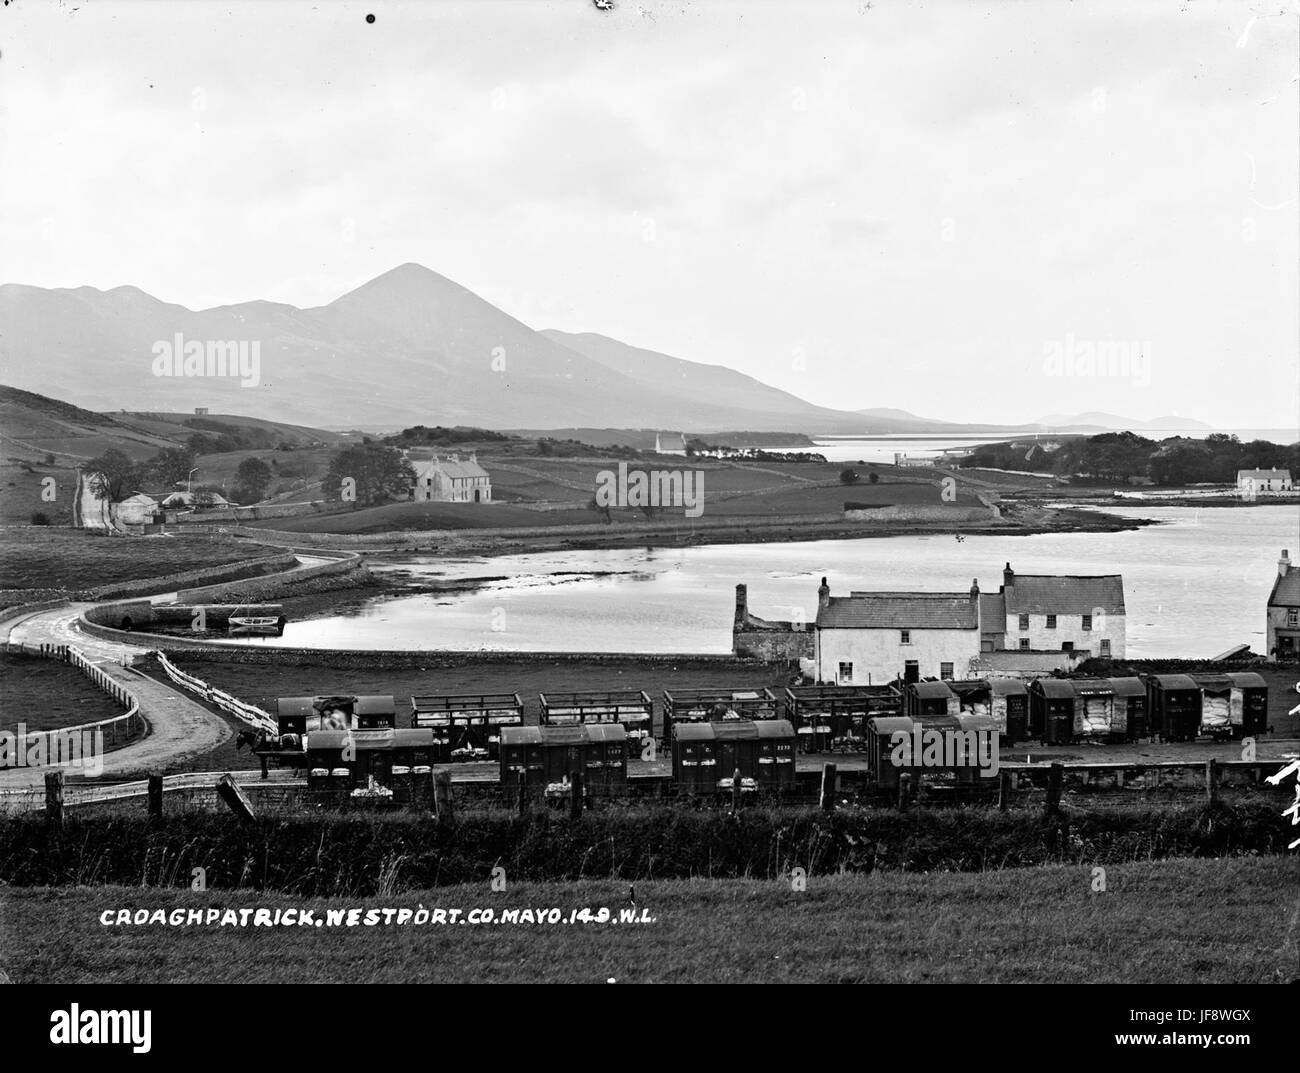 Croagh Patrick, Westport, Co Mayo and a whole lot more 34291082211 o Stock Photo